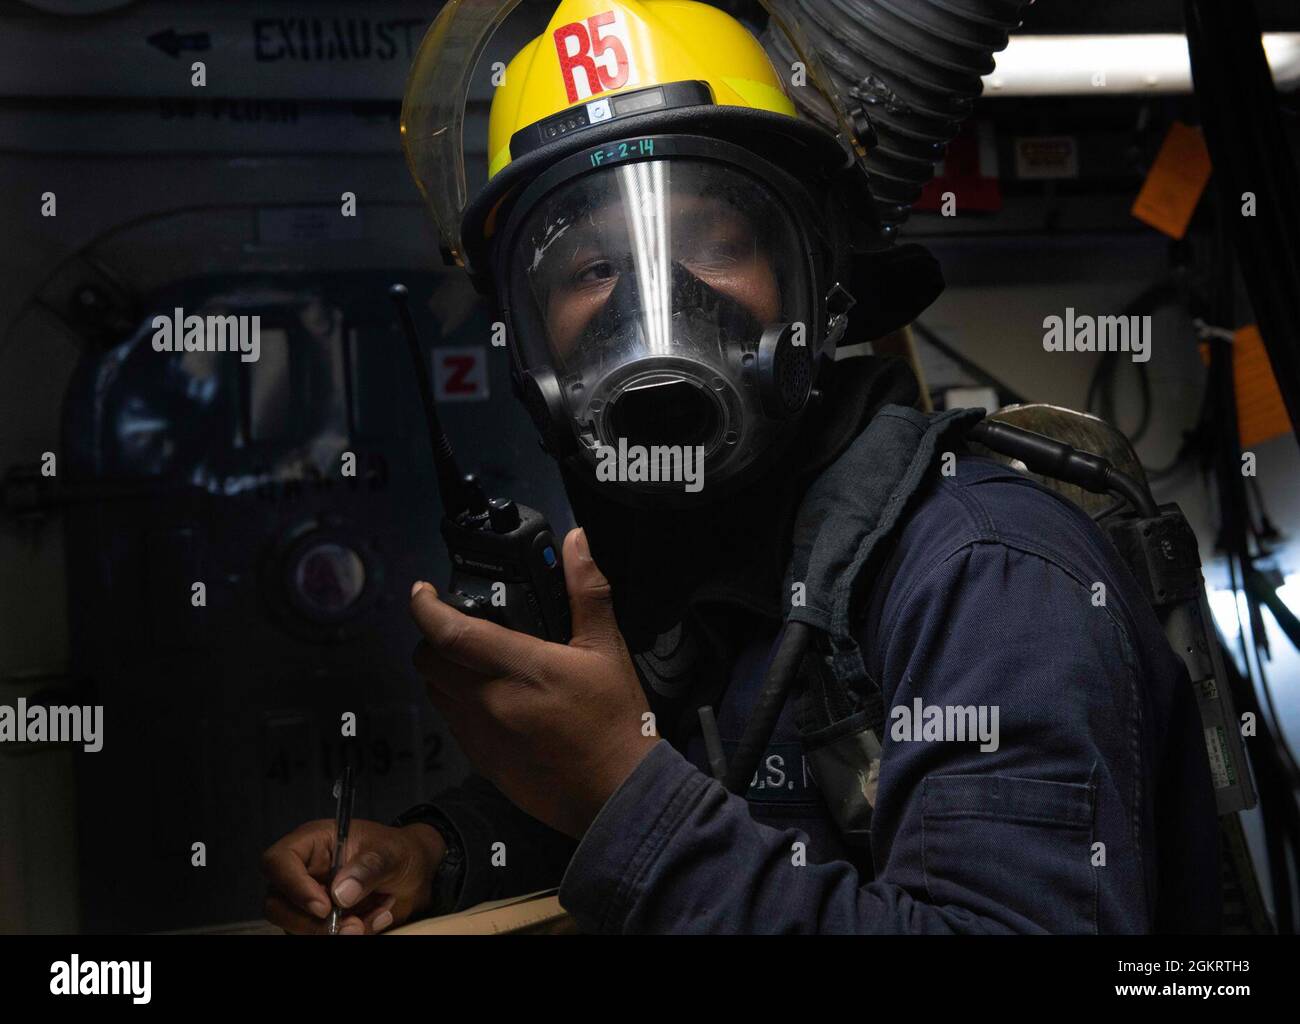 YOKOSUKA, Japan (June 23, 2021) – Hull Maintenance Technician 2nd Class  Tony Skipper, from Jacksonville, Fla., relays information over the  hand-held radio as the on-scene leader during an integrated fire drill with